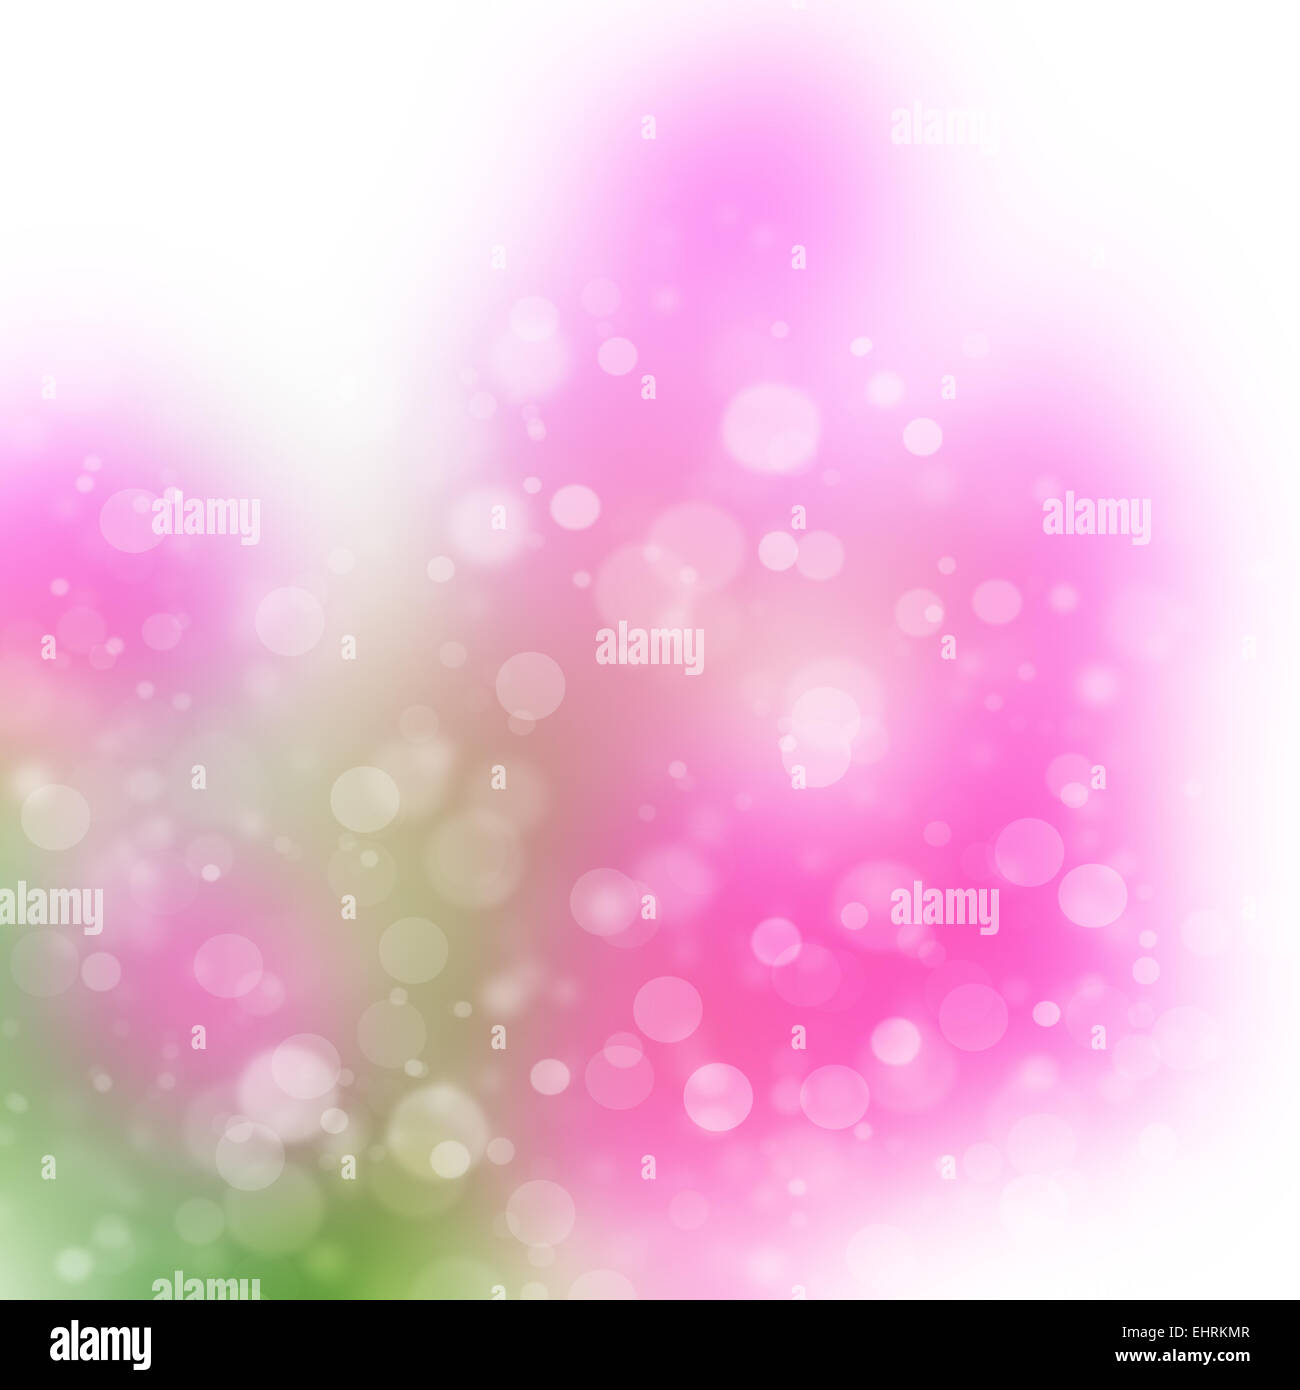 Colorful bokeh abstract light background for template design, filter image Stock Photo